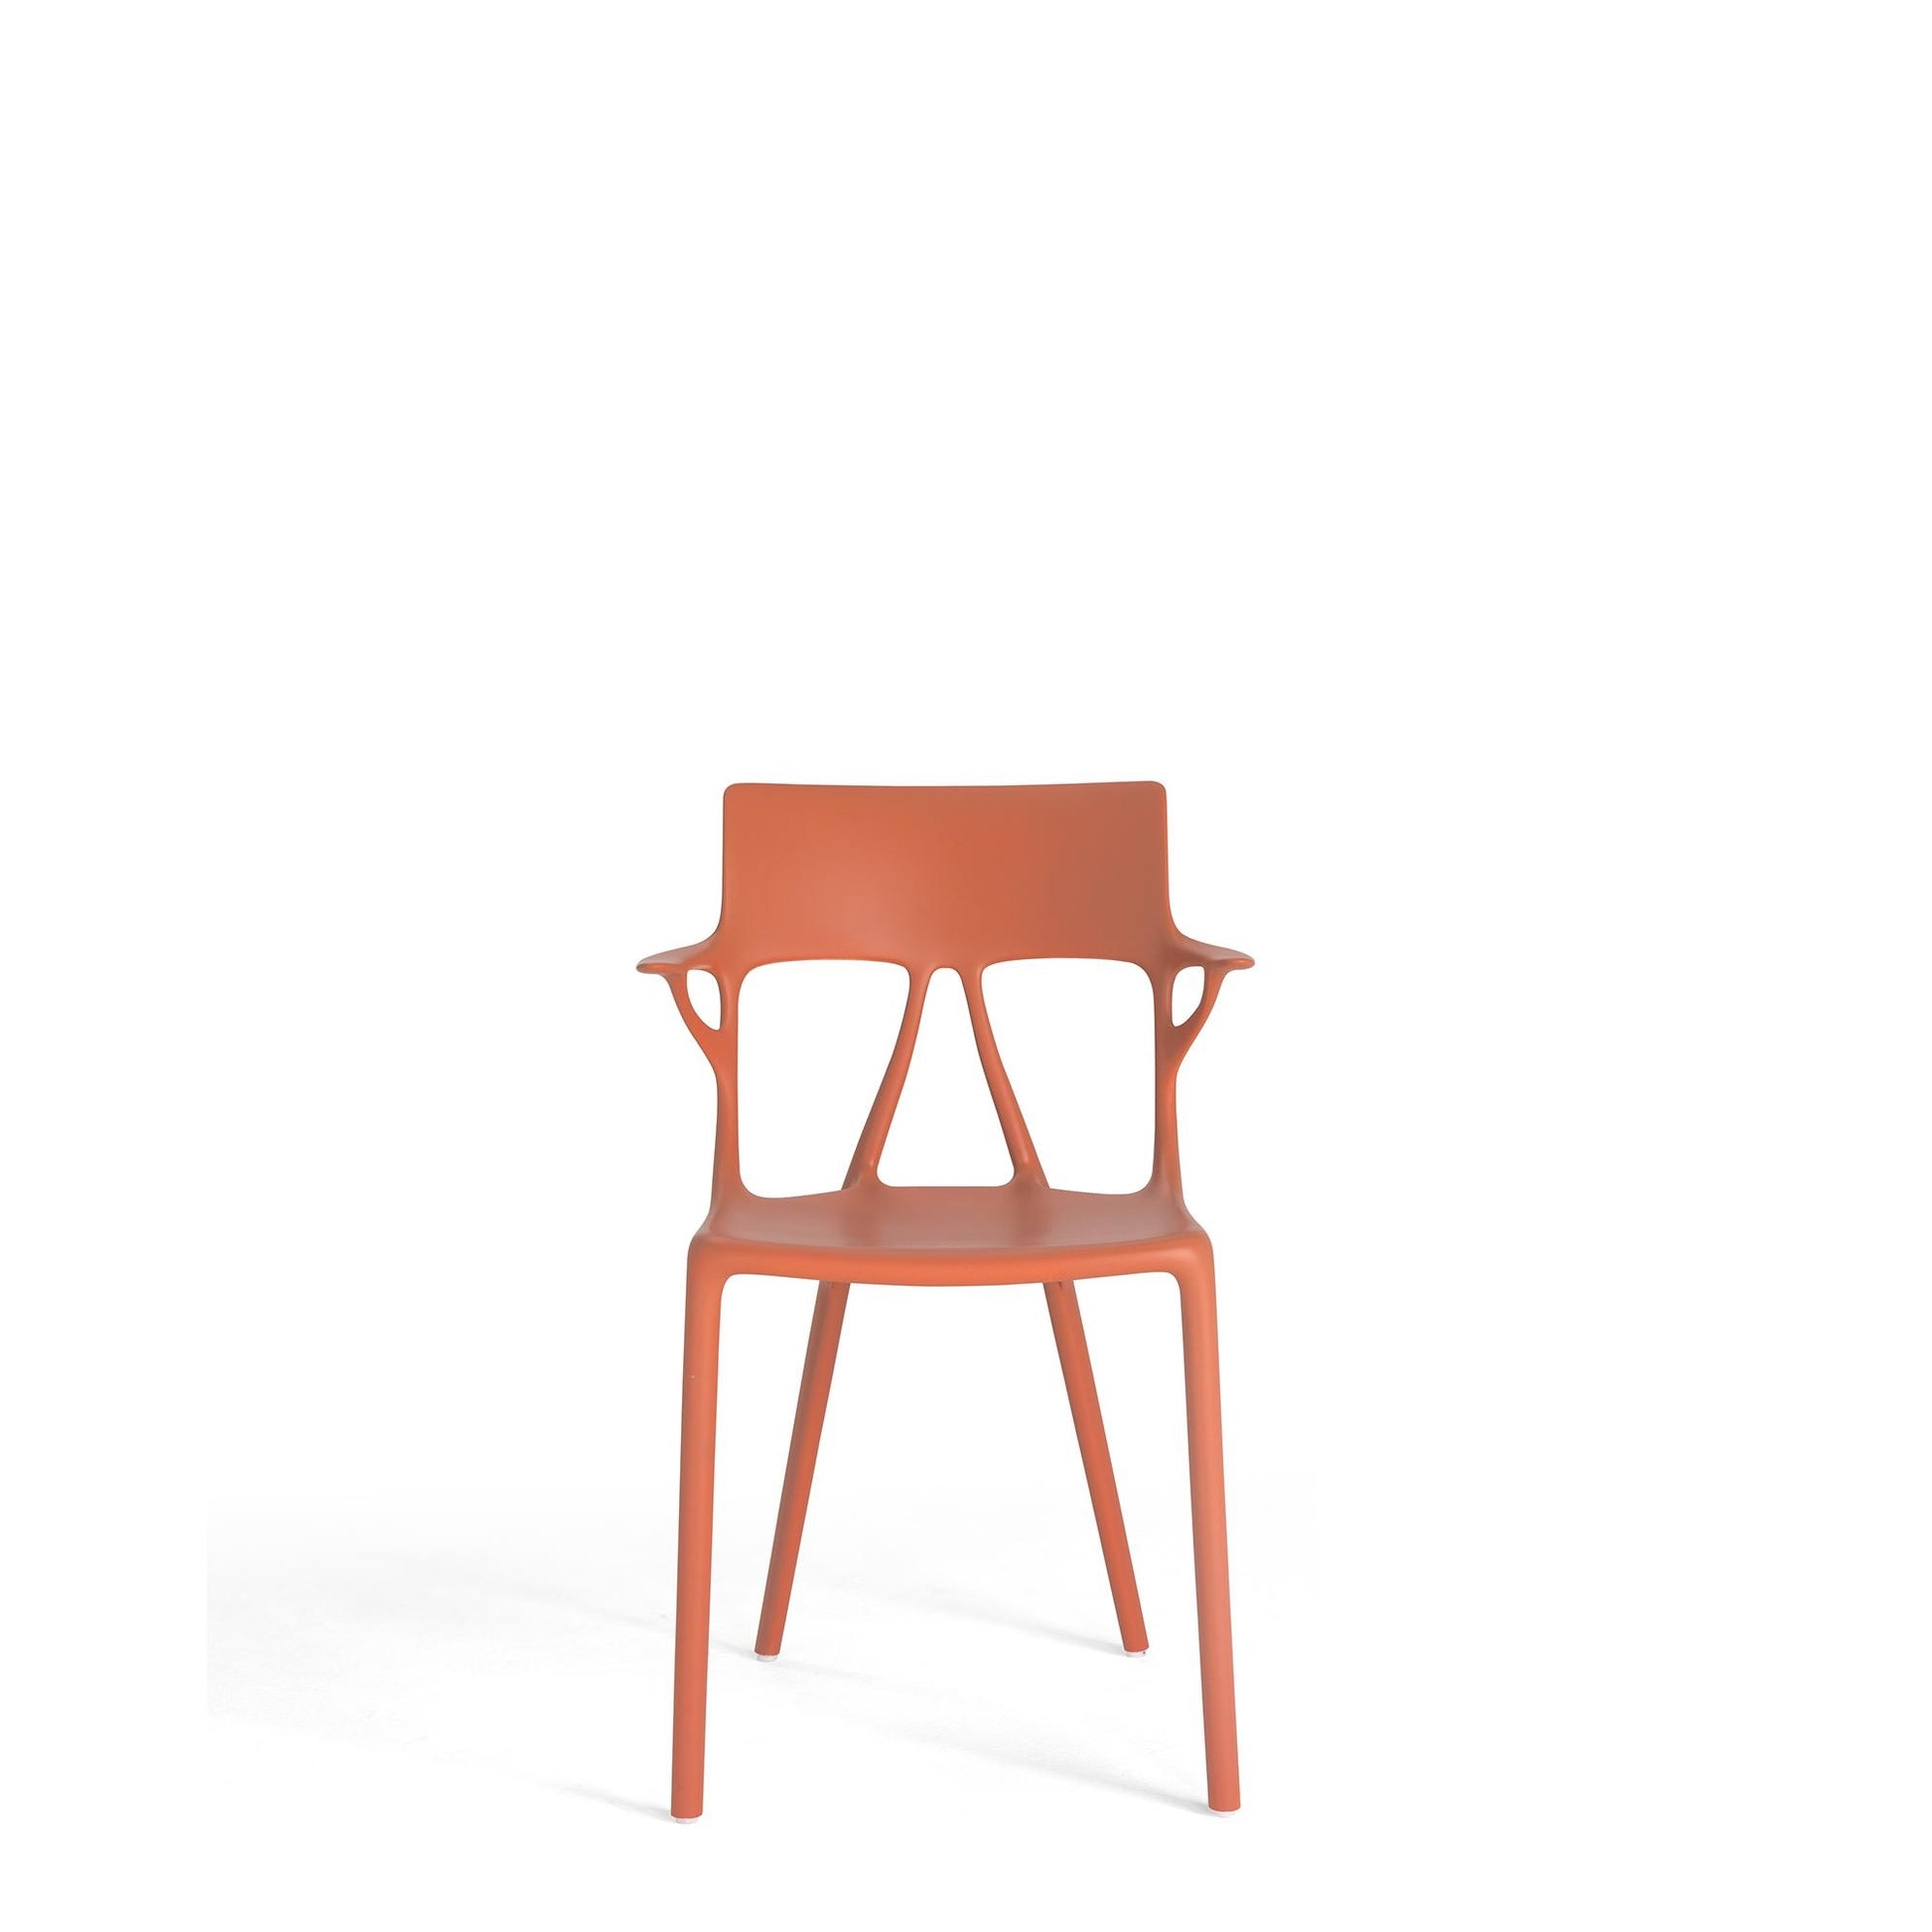 AI Dining Chair by Kartell #Orange